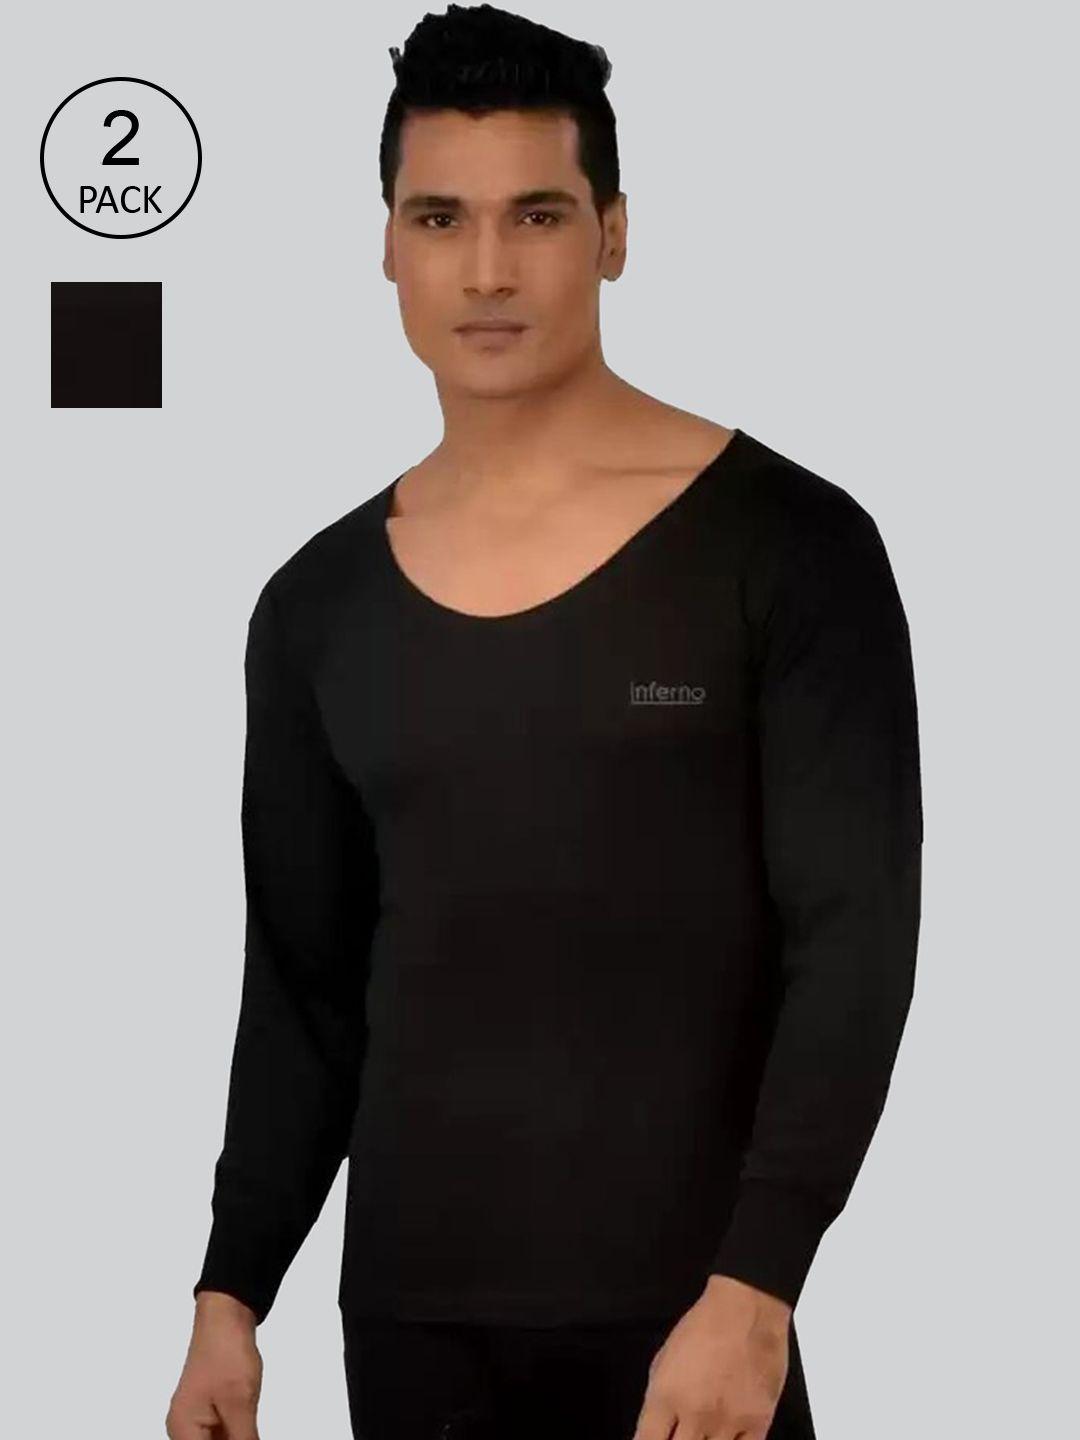 inferno men pack of 2 solid thermal tops